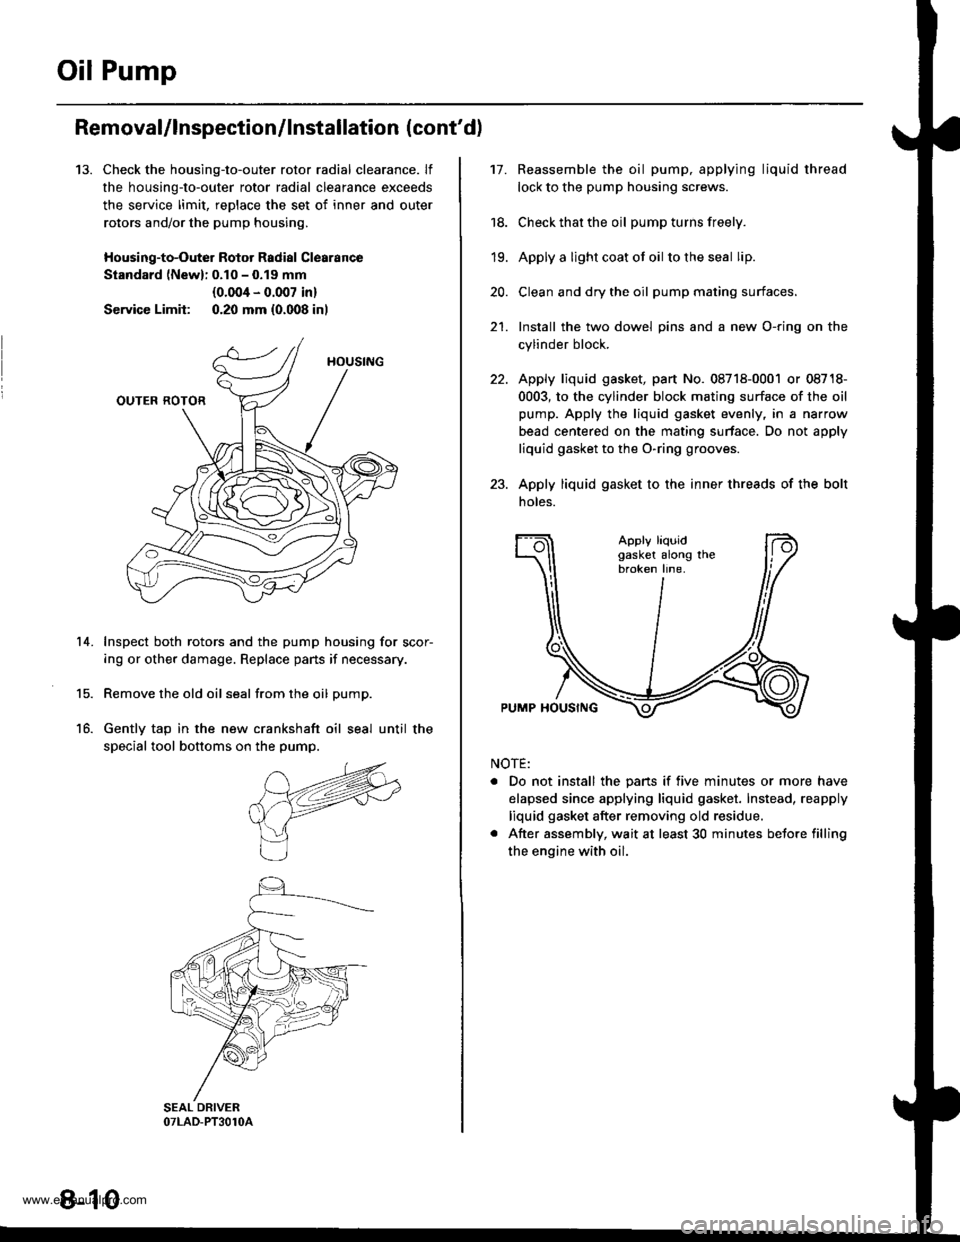 HONDA CR-V 2000 RD1-RD3 / 1.G User Guide 
Oil Pump
13.
Removal/lnspection/lnstallation (contd)
Check the housing-to-outer rotor radial clearance. lf
the housing-to-outer rotor radial clearance exceeds
the service limit, reDlace the set of i